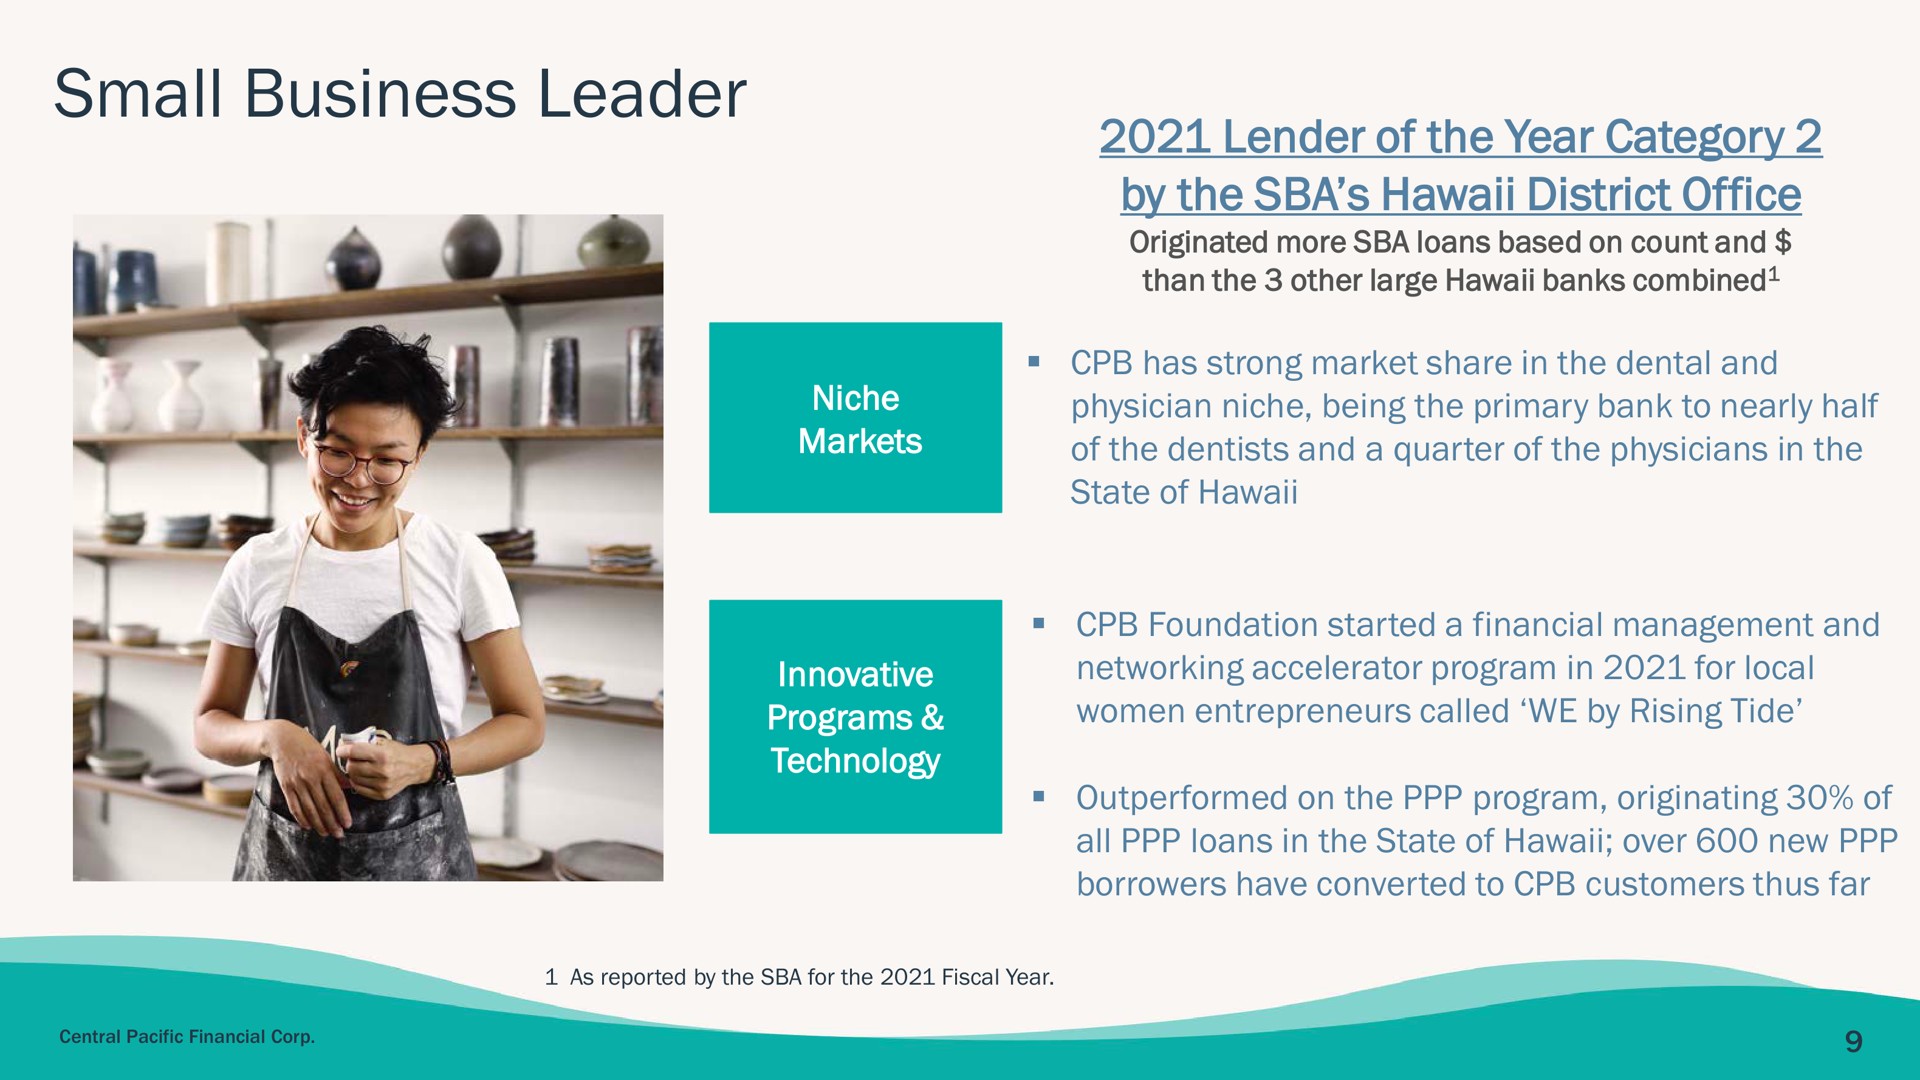 small business leader lender of the year category by the district office | Central Pacific Financial